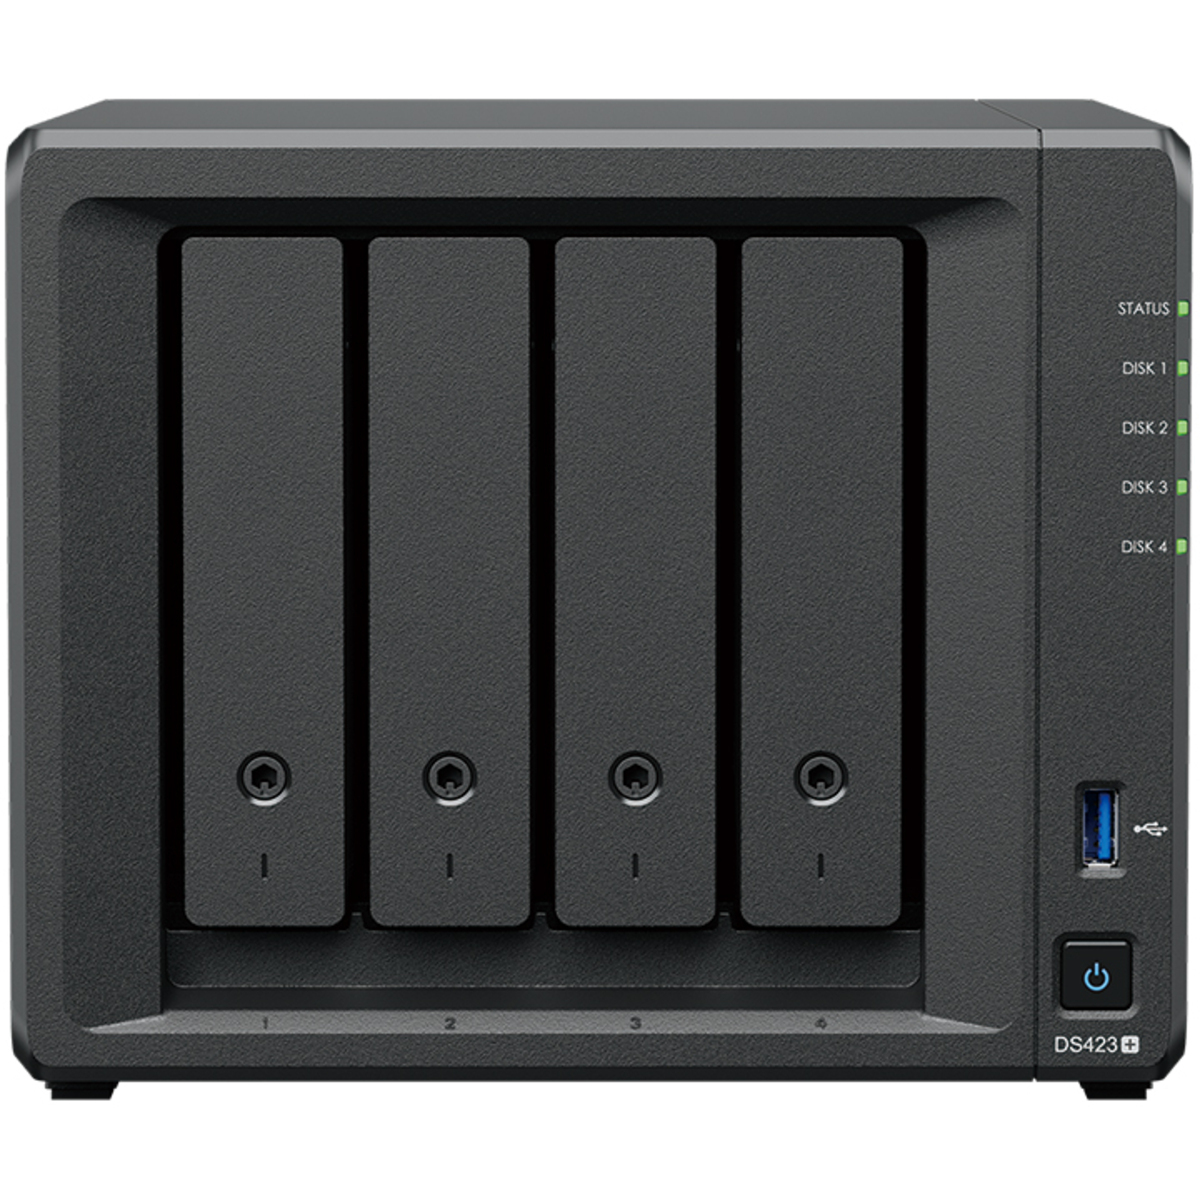 Synology DiskStation DS423+ Desktop 4-Bay Multimedia / Power User / Business NAS - Network Attached Storage Device Burn-In Tested Configurations - FREE RAM UPGRADE DiskStation DS423+